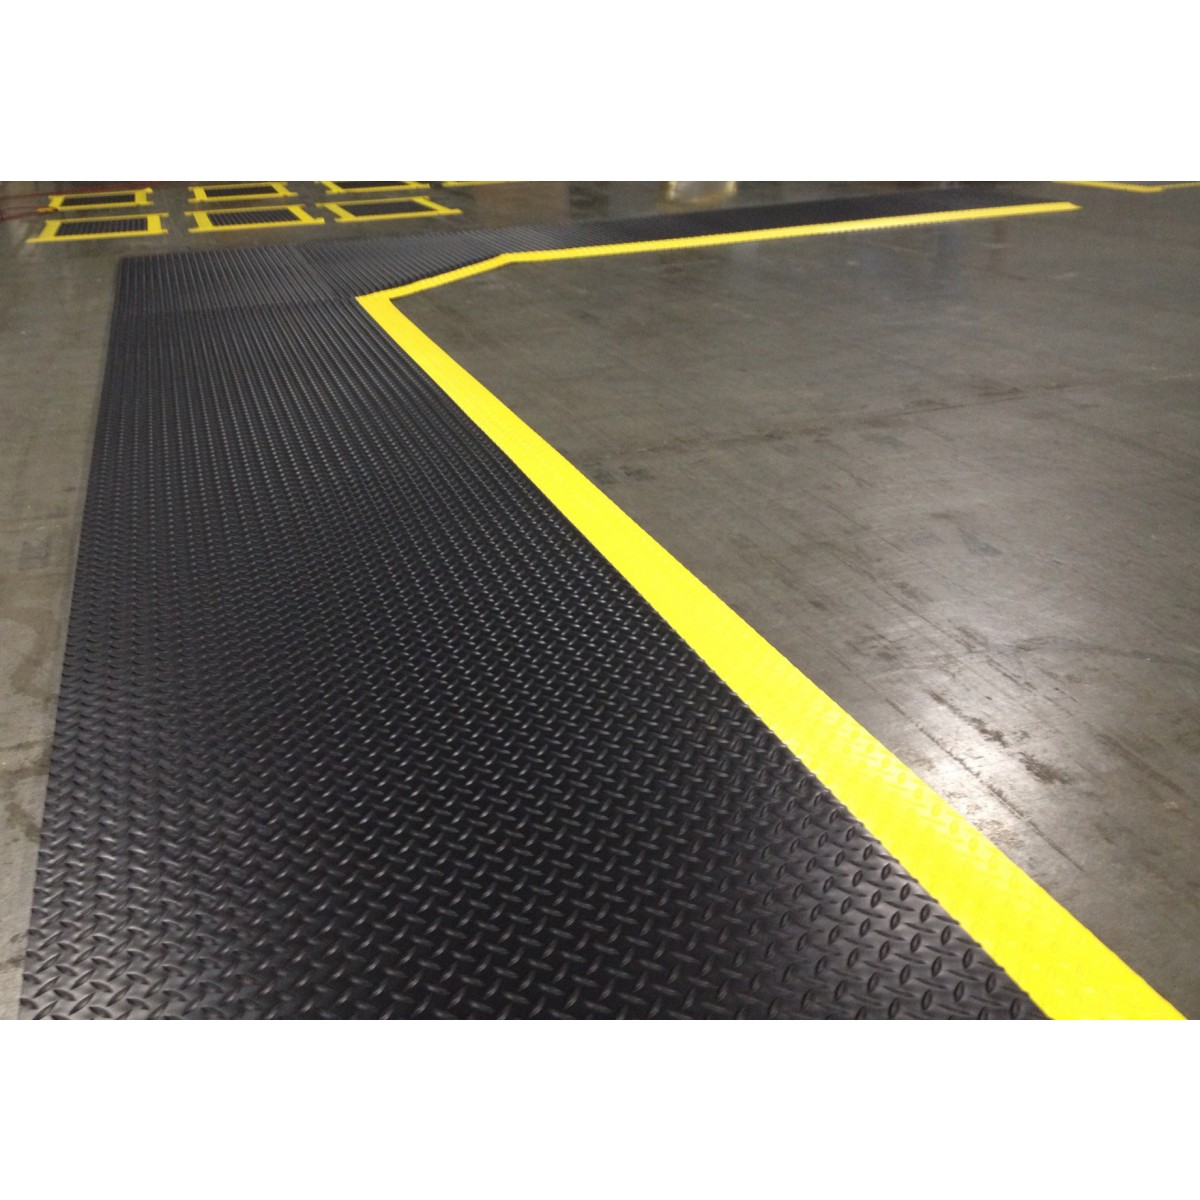 Workers Delight Diamond Deck Plate Anti-Fatigue Mat